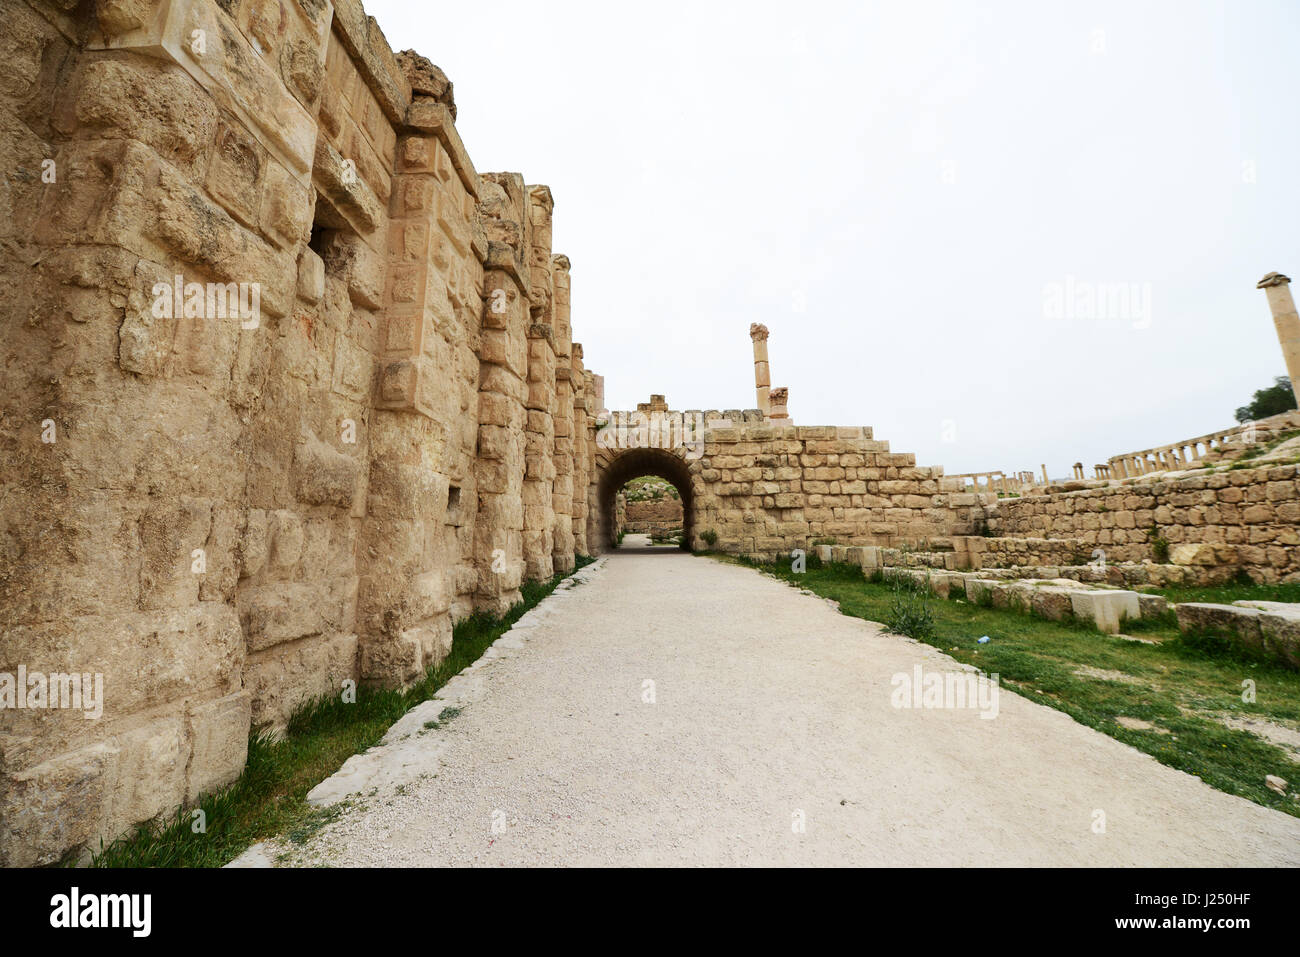 The path leading to the South gate in the ancient Roman city of Jerash in Jordan. Stock Photo